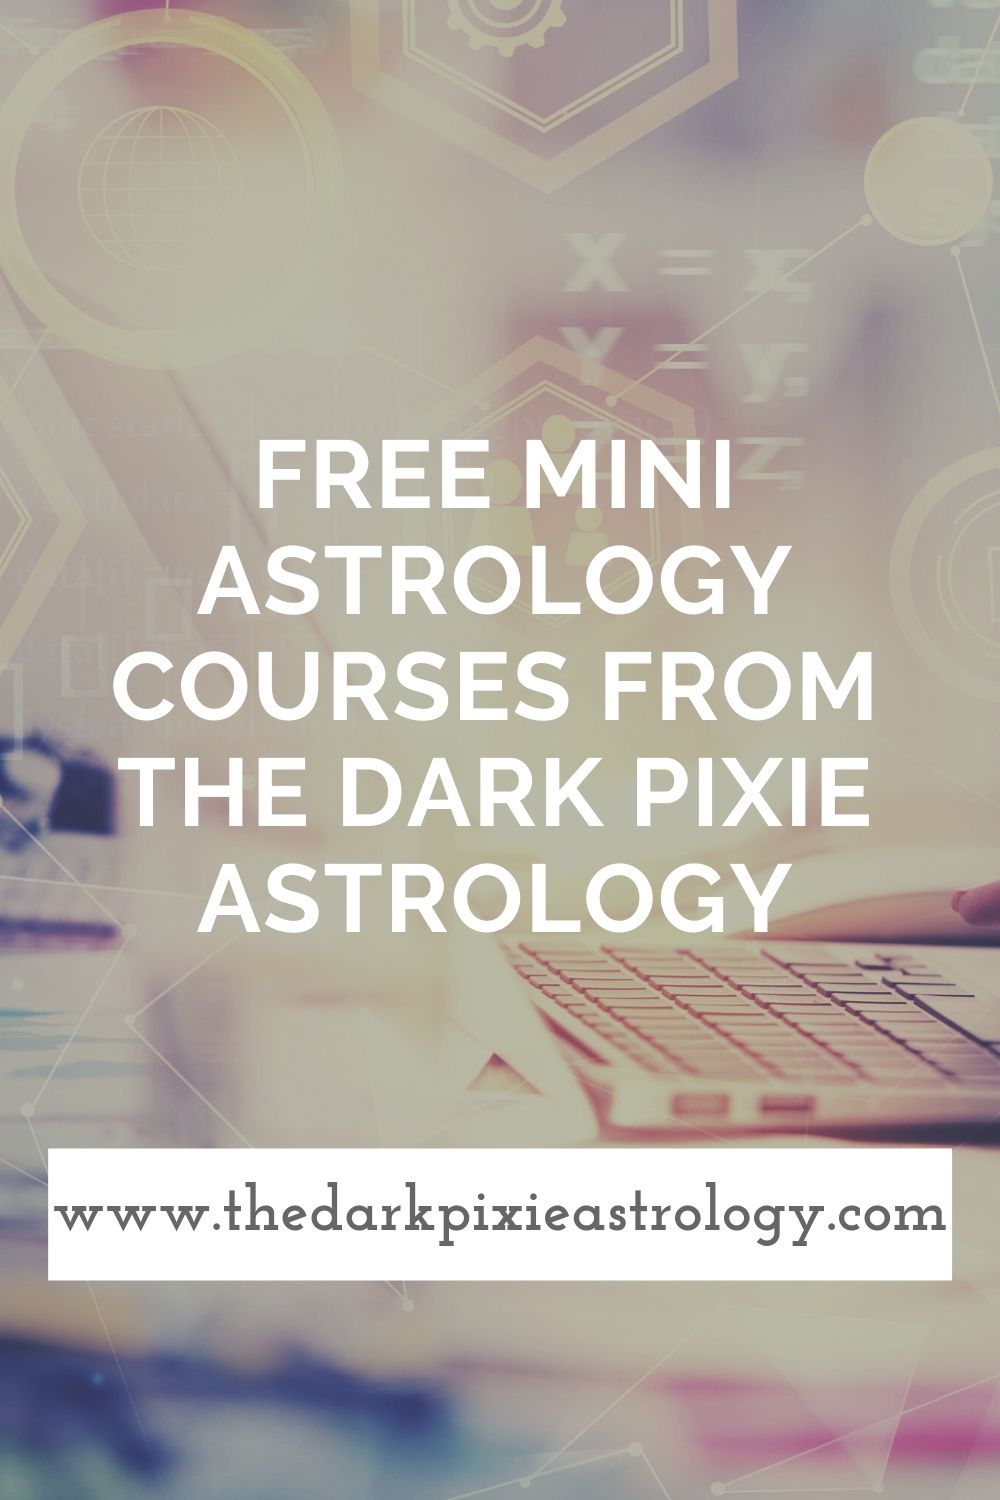 Free Mini Astrology Courses from The Dark Pixie Astrology